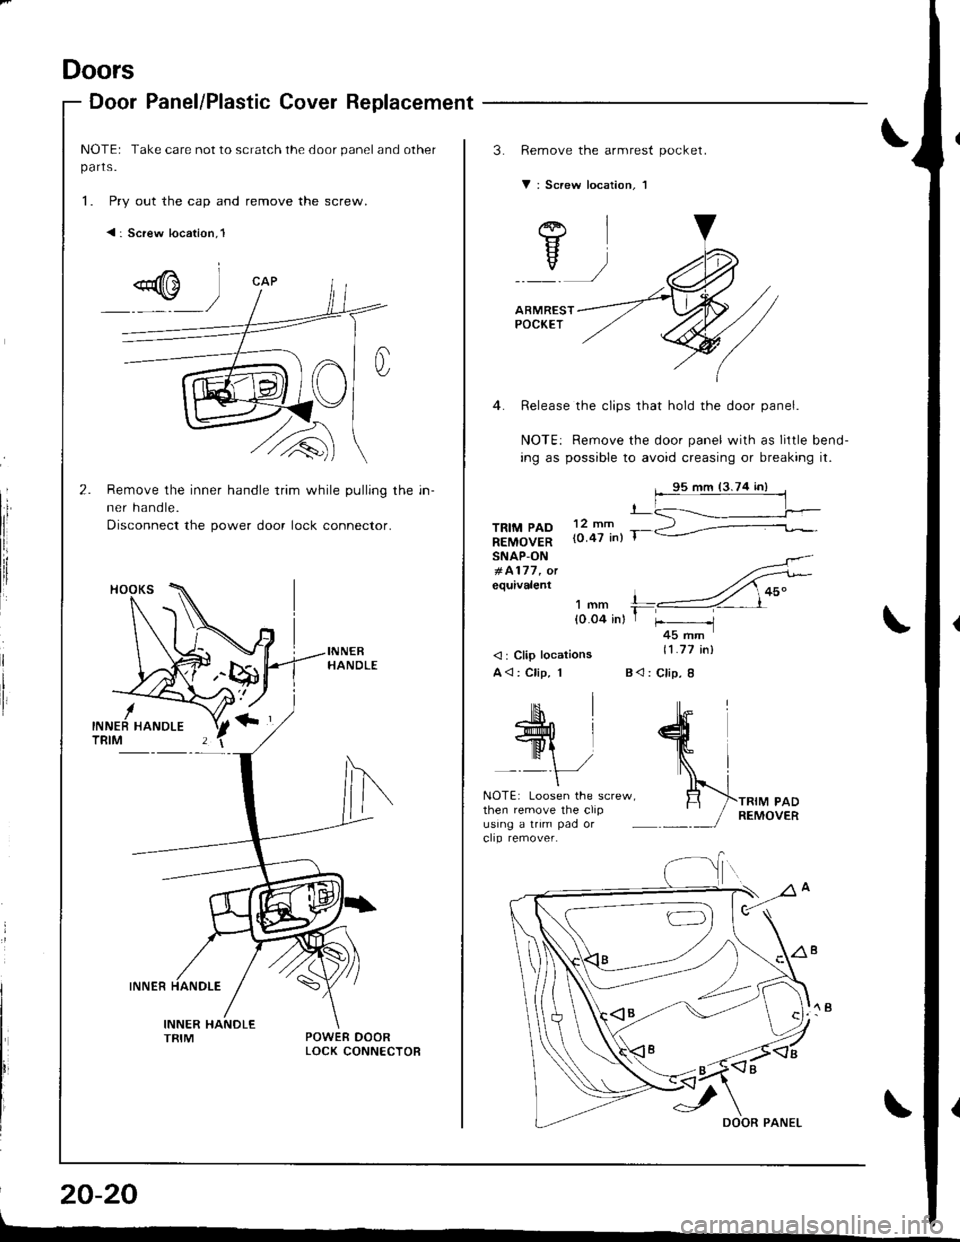 HONDA INTEGRA 1998 4.G Workshop Manual Doors
Door Panel/Plastic Cover Replacement
NOTEr Take care not to scratch the door panel and other
parts.
1. Pry out the cap and remove the screw.
< : Screw location,l
I
tli
I
Remove the inner handle